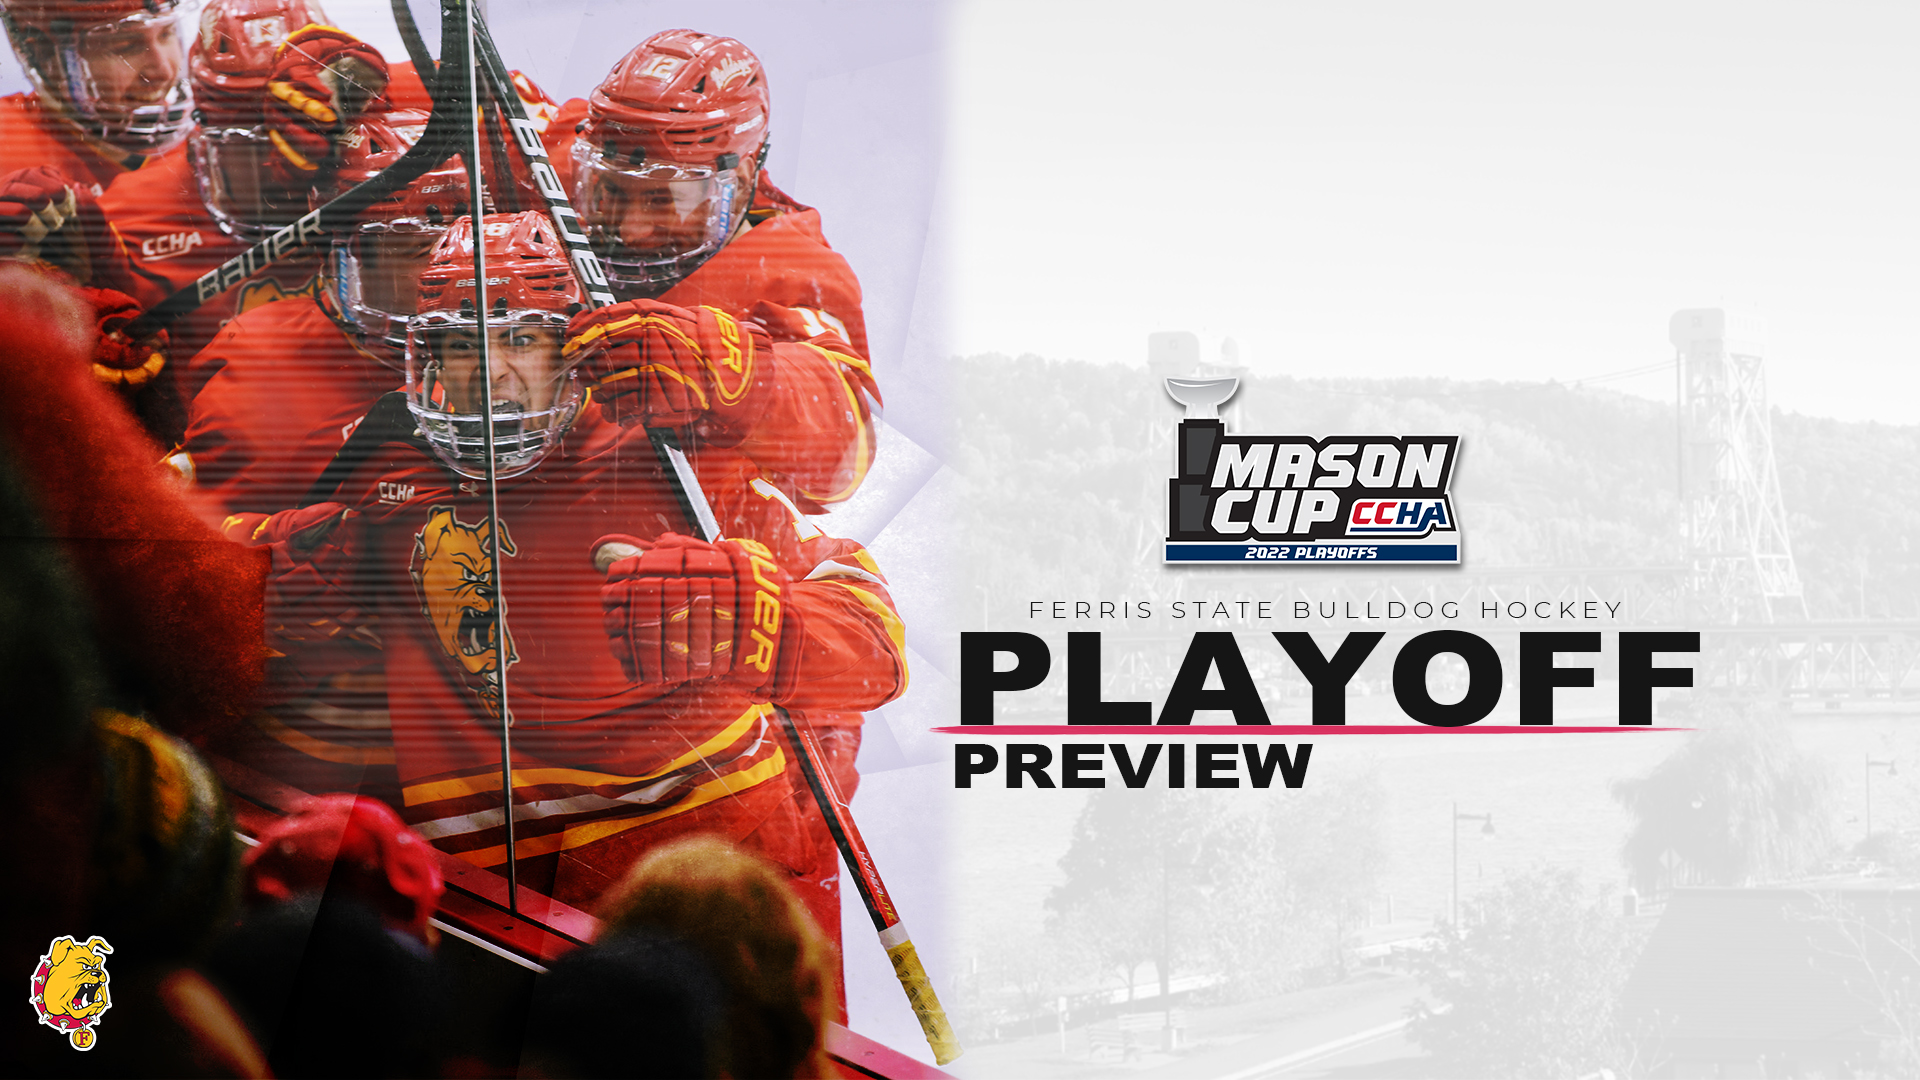 CCHA Quarterfinal Preview | Bulldogs Travel To Second Seeded Michigan Tech To Open Mason Cup Playoffs